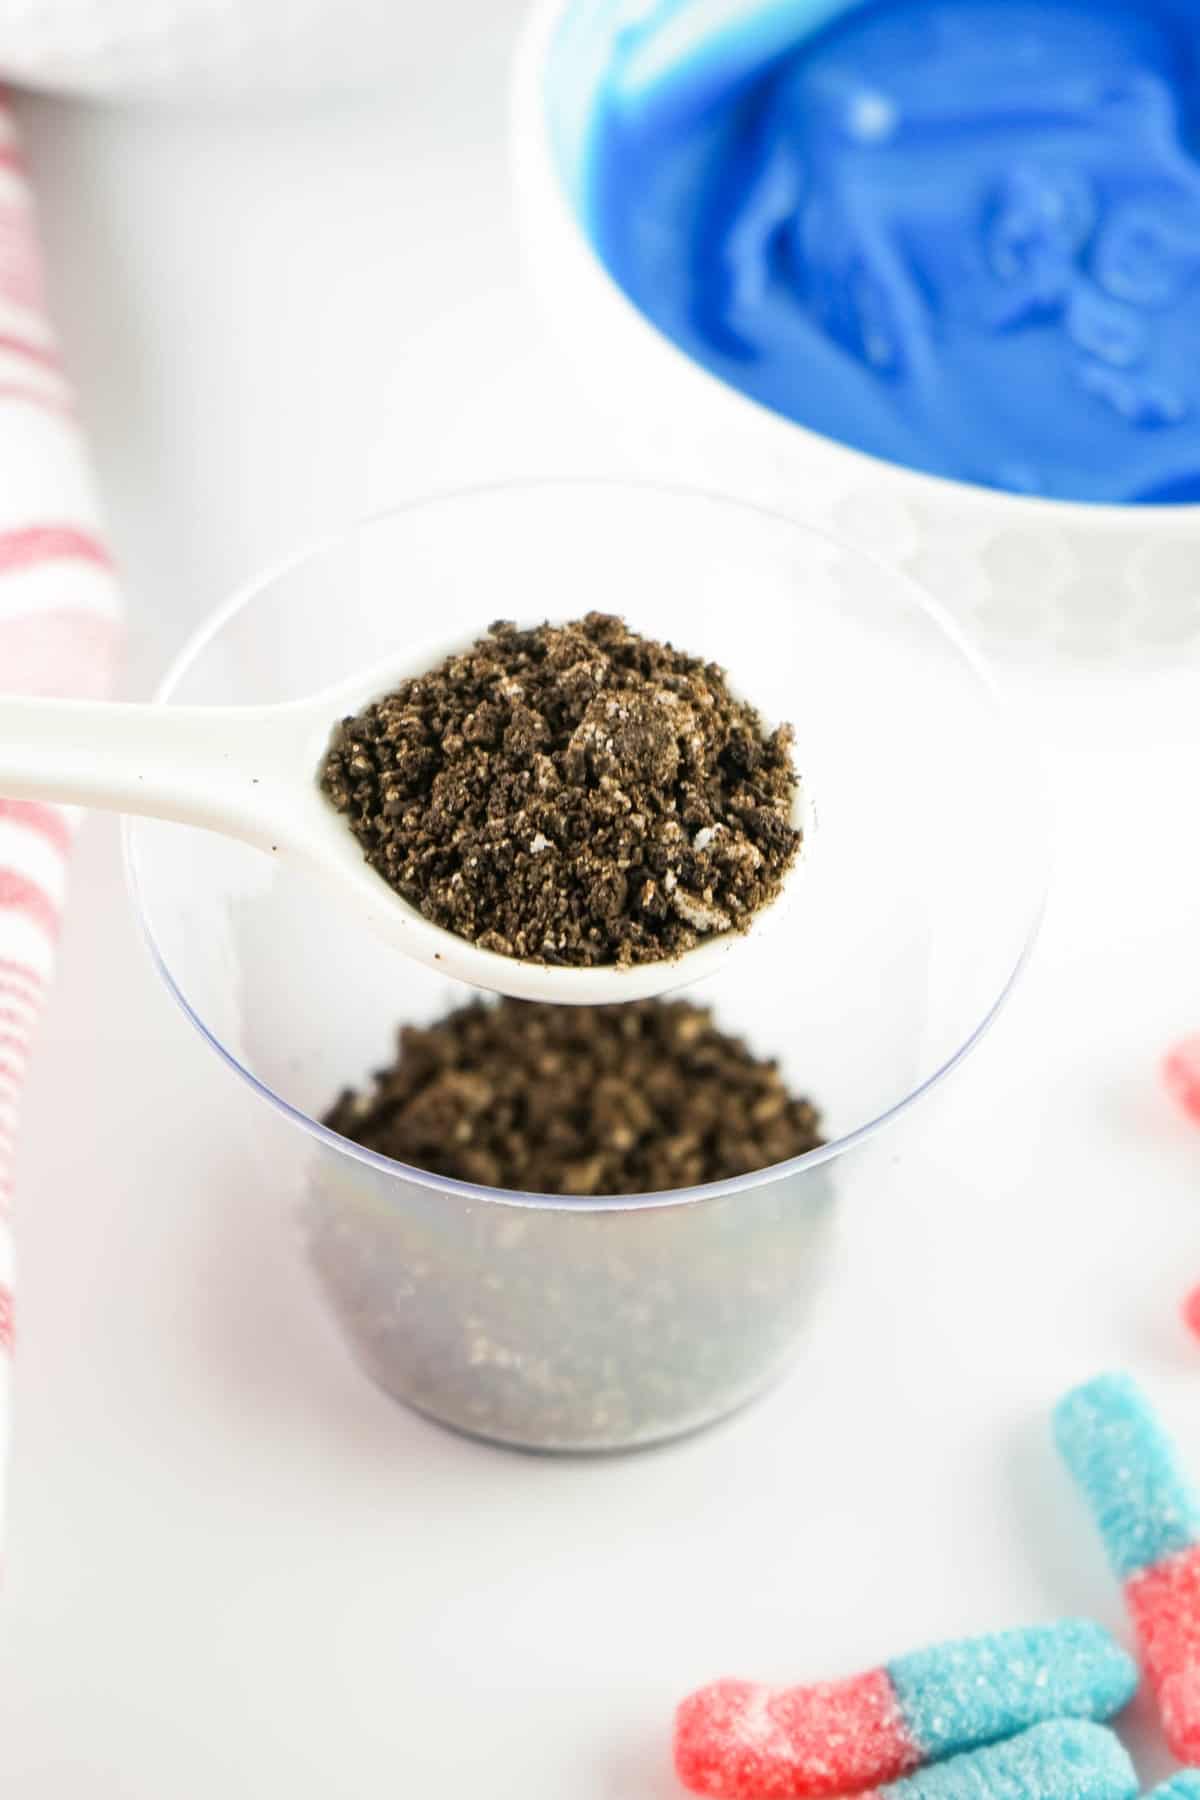 Crush up Oreos and put 1 tbsp in the bottom of a Dessert Cup.